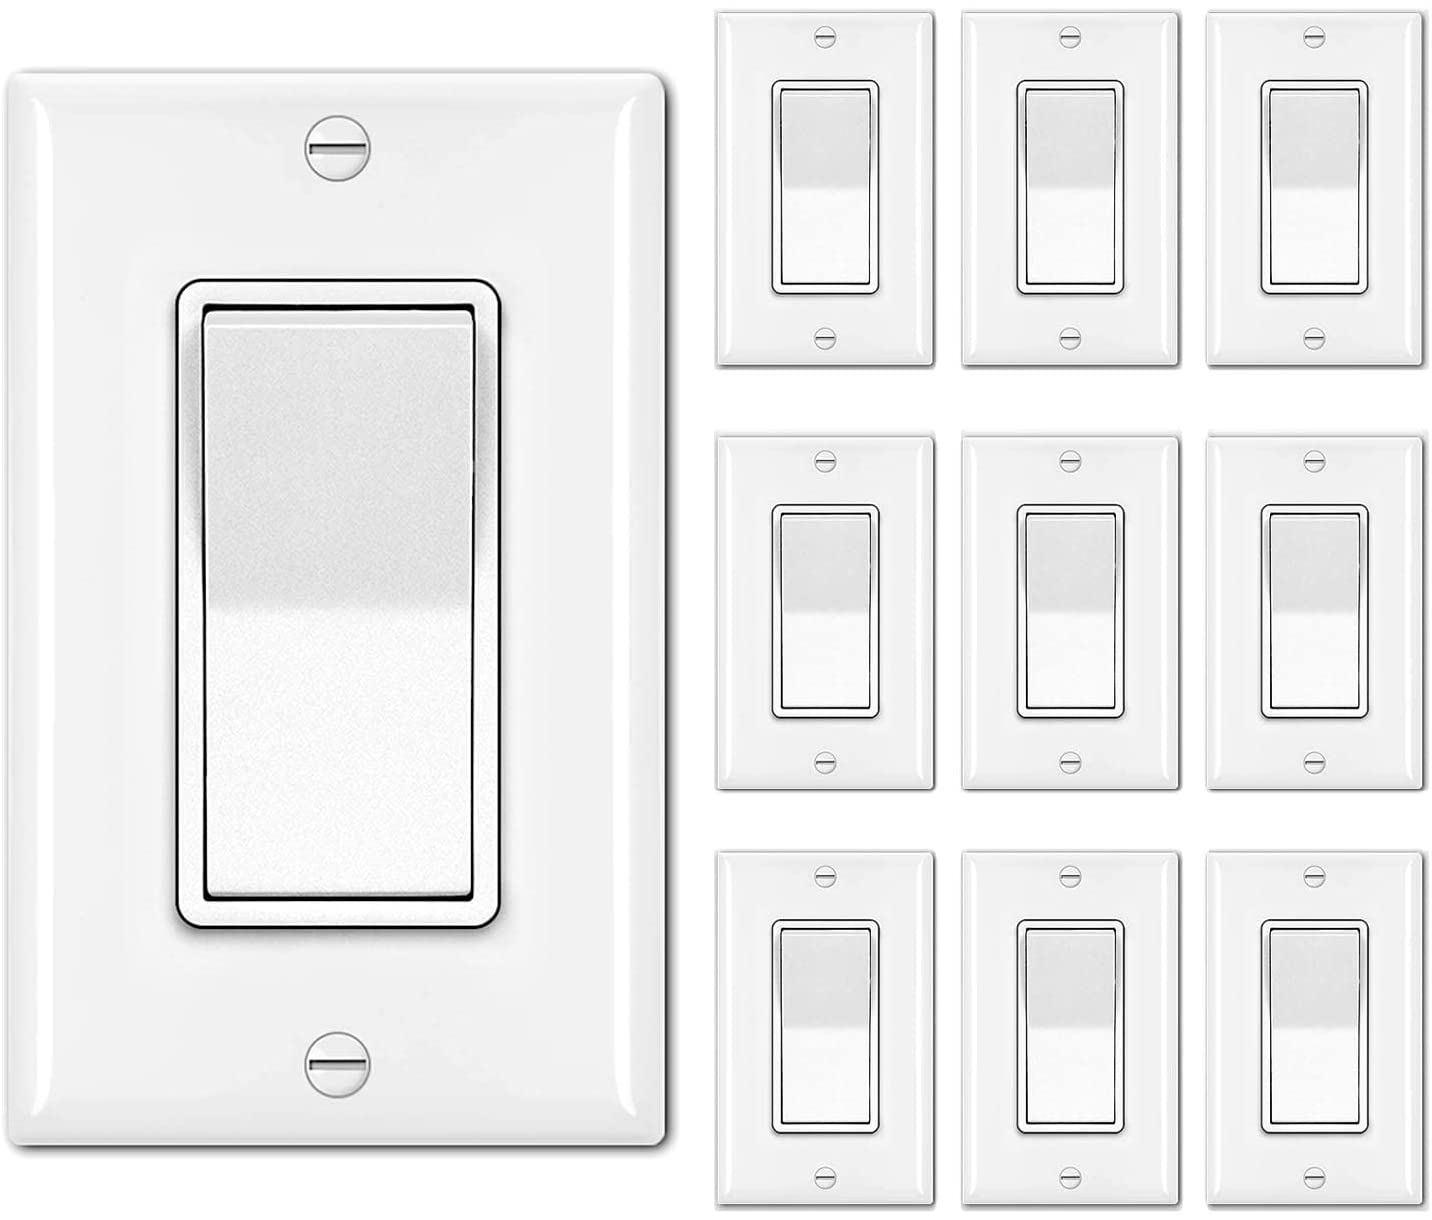 [10 Pack] BESTTEN Single Pole Decorator Wall Light Switch with Wallplate, 15A 120/277V, On/Off Rocker Paddle Interrupter for LED and other Lamps, UL Listed, White - image 1 of 7